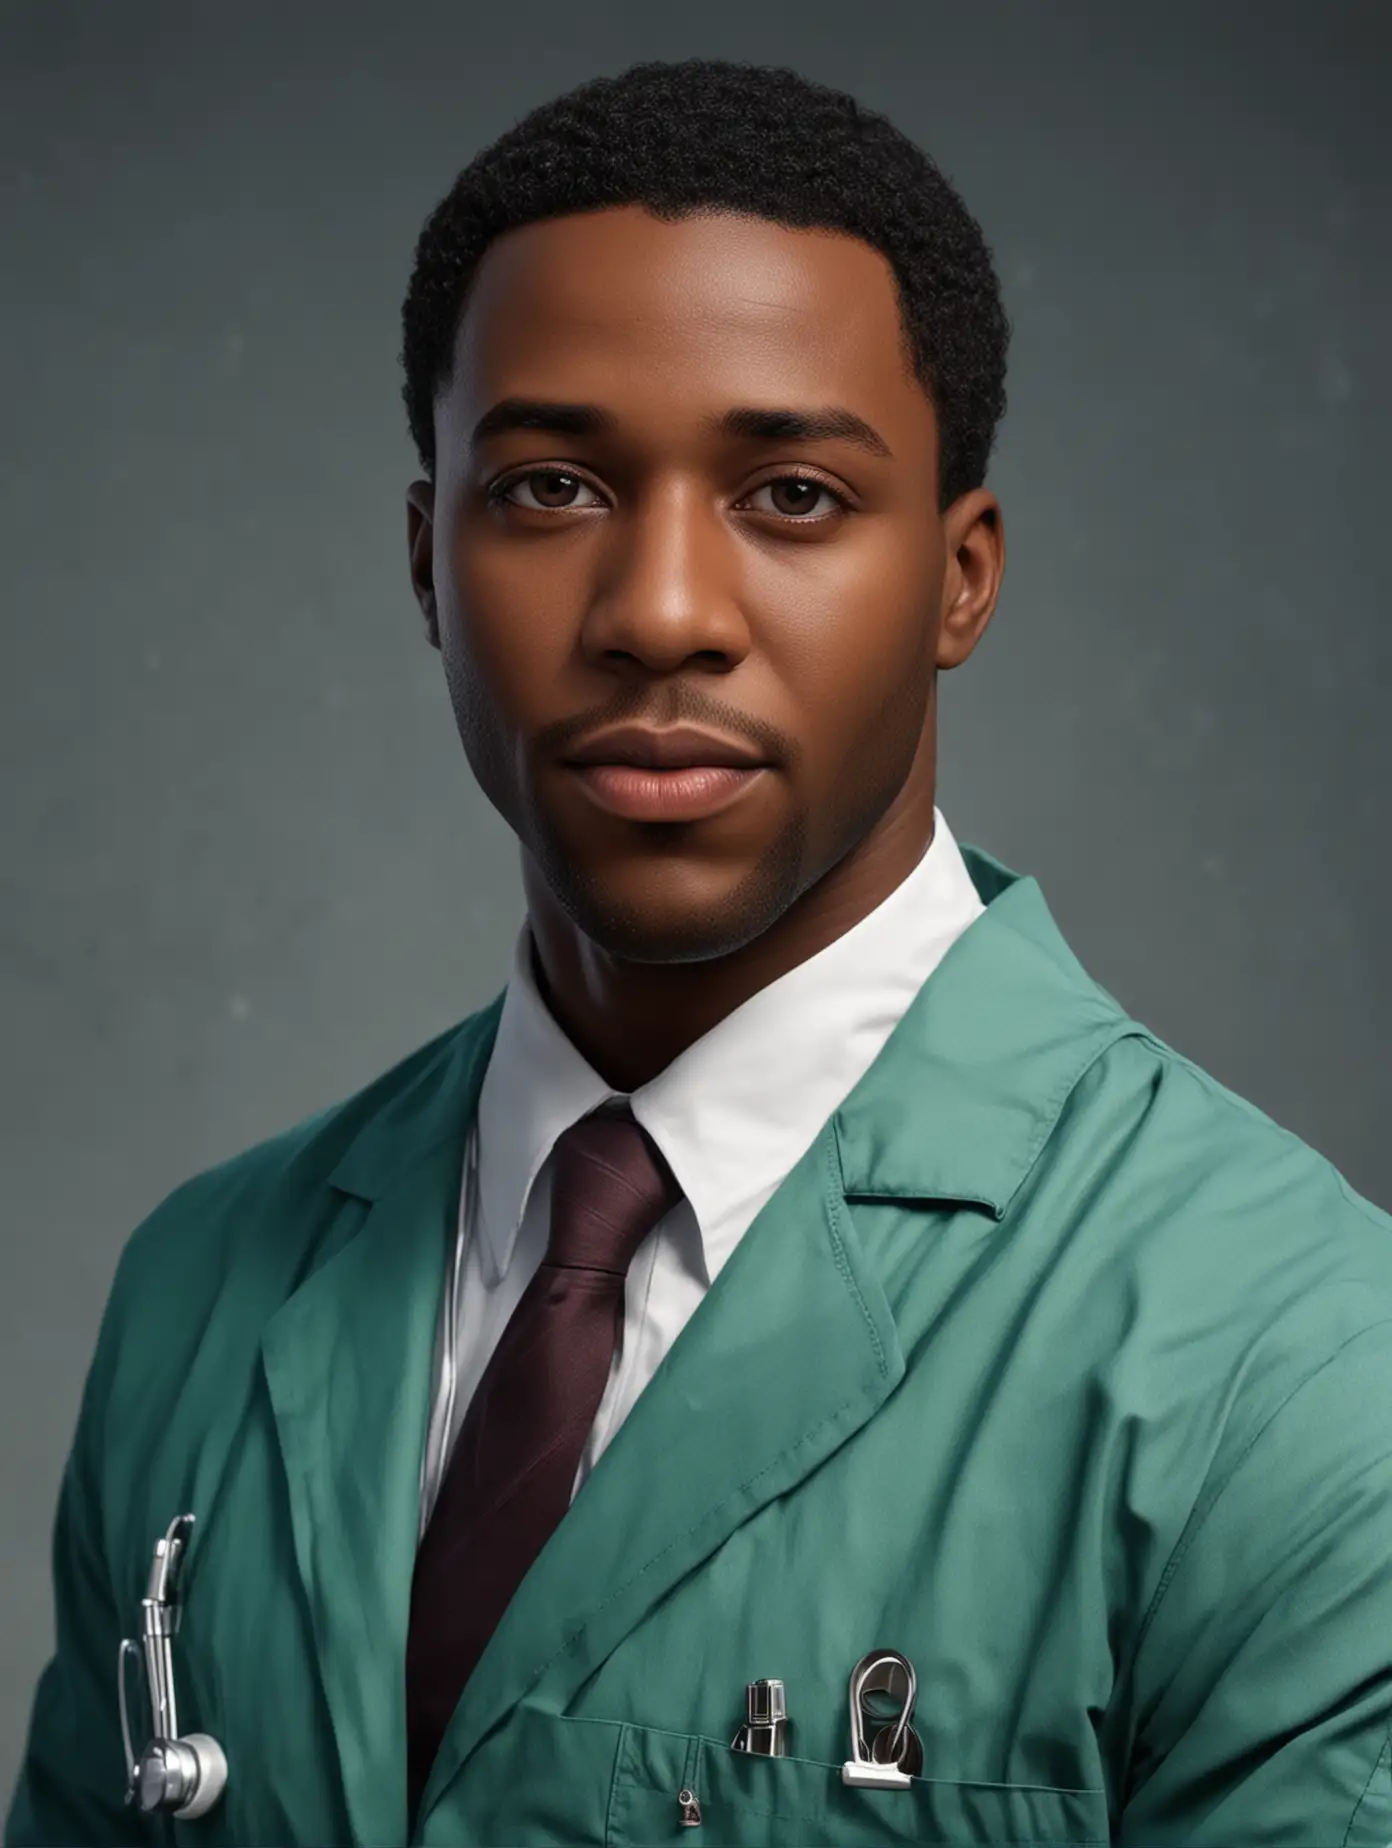 please create a realistic Black male medical specialist